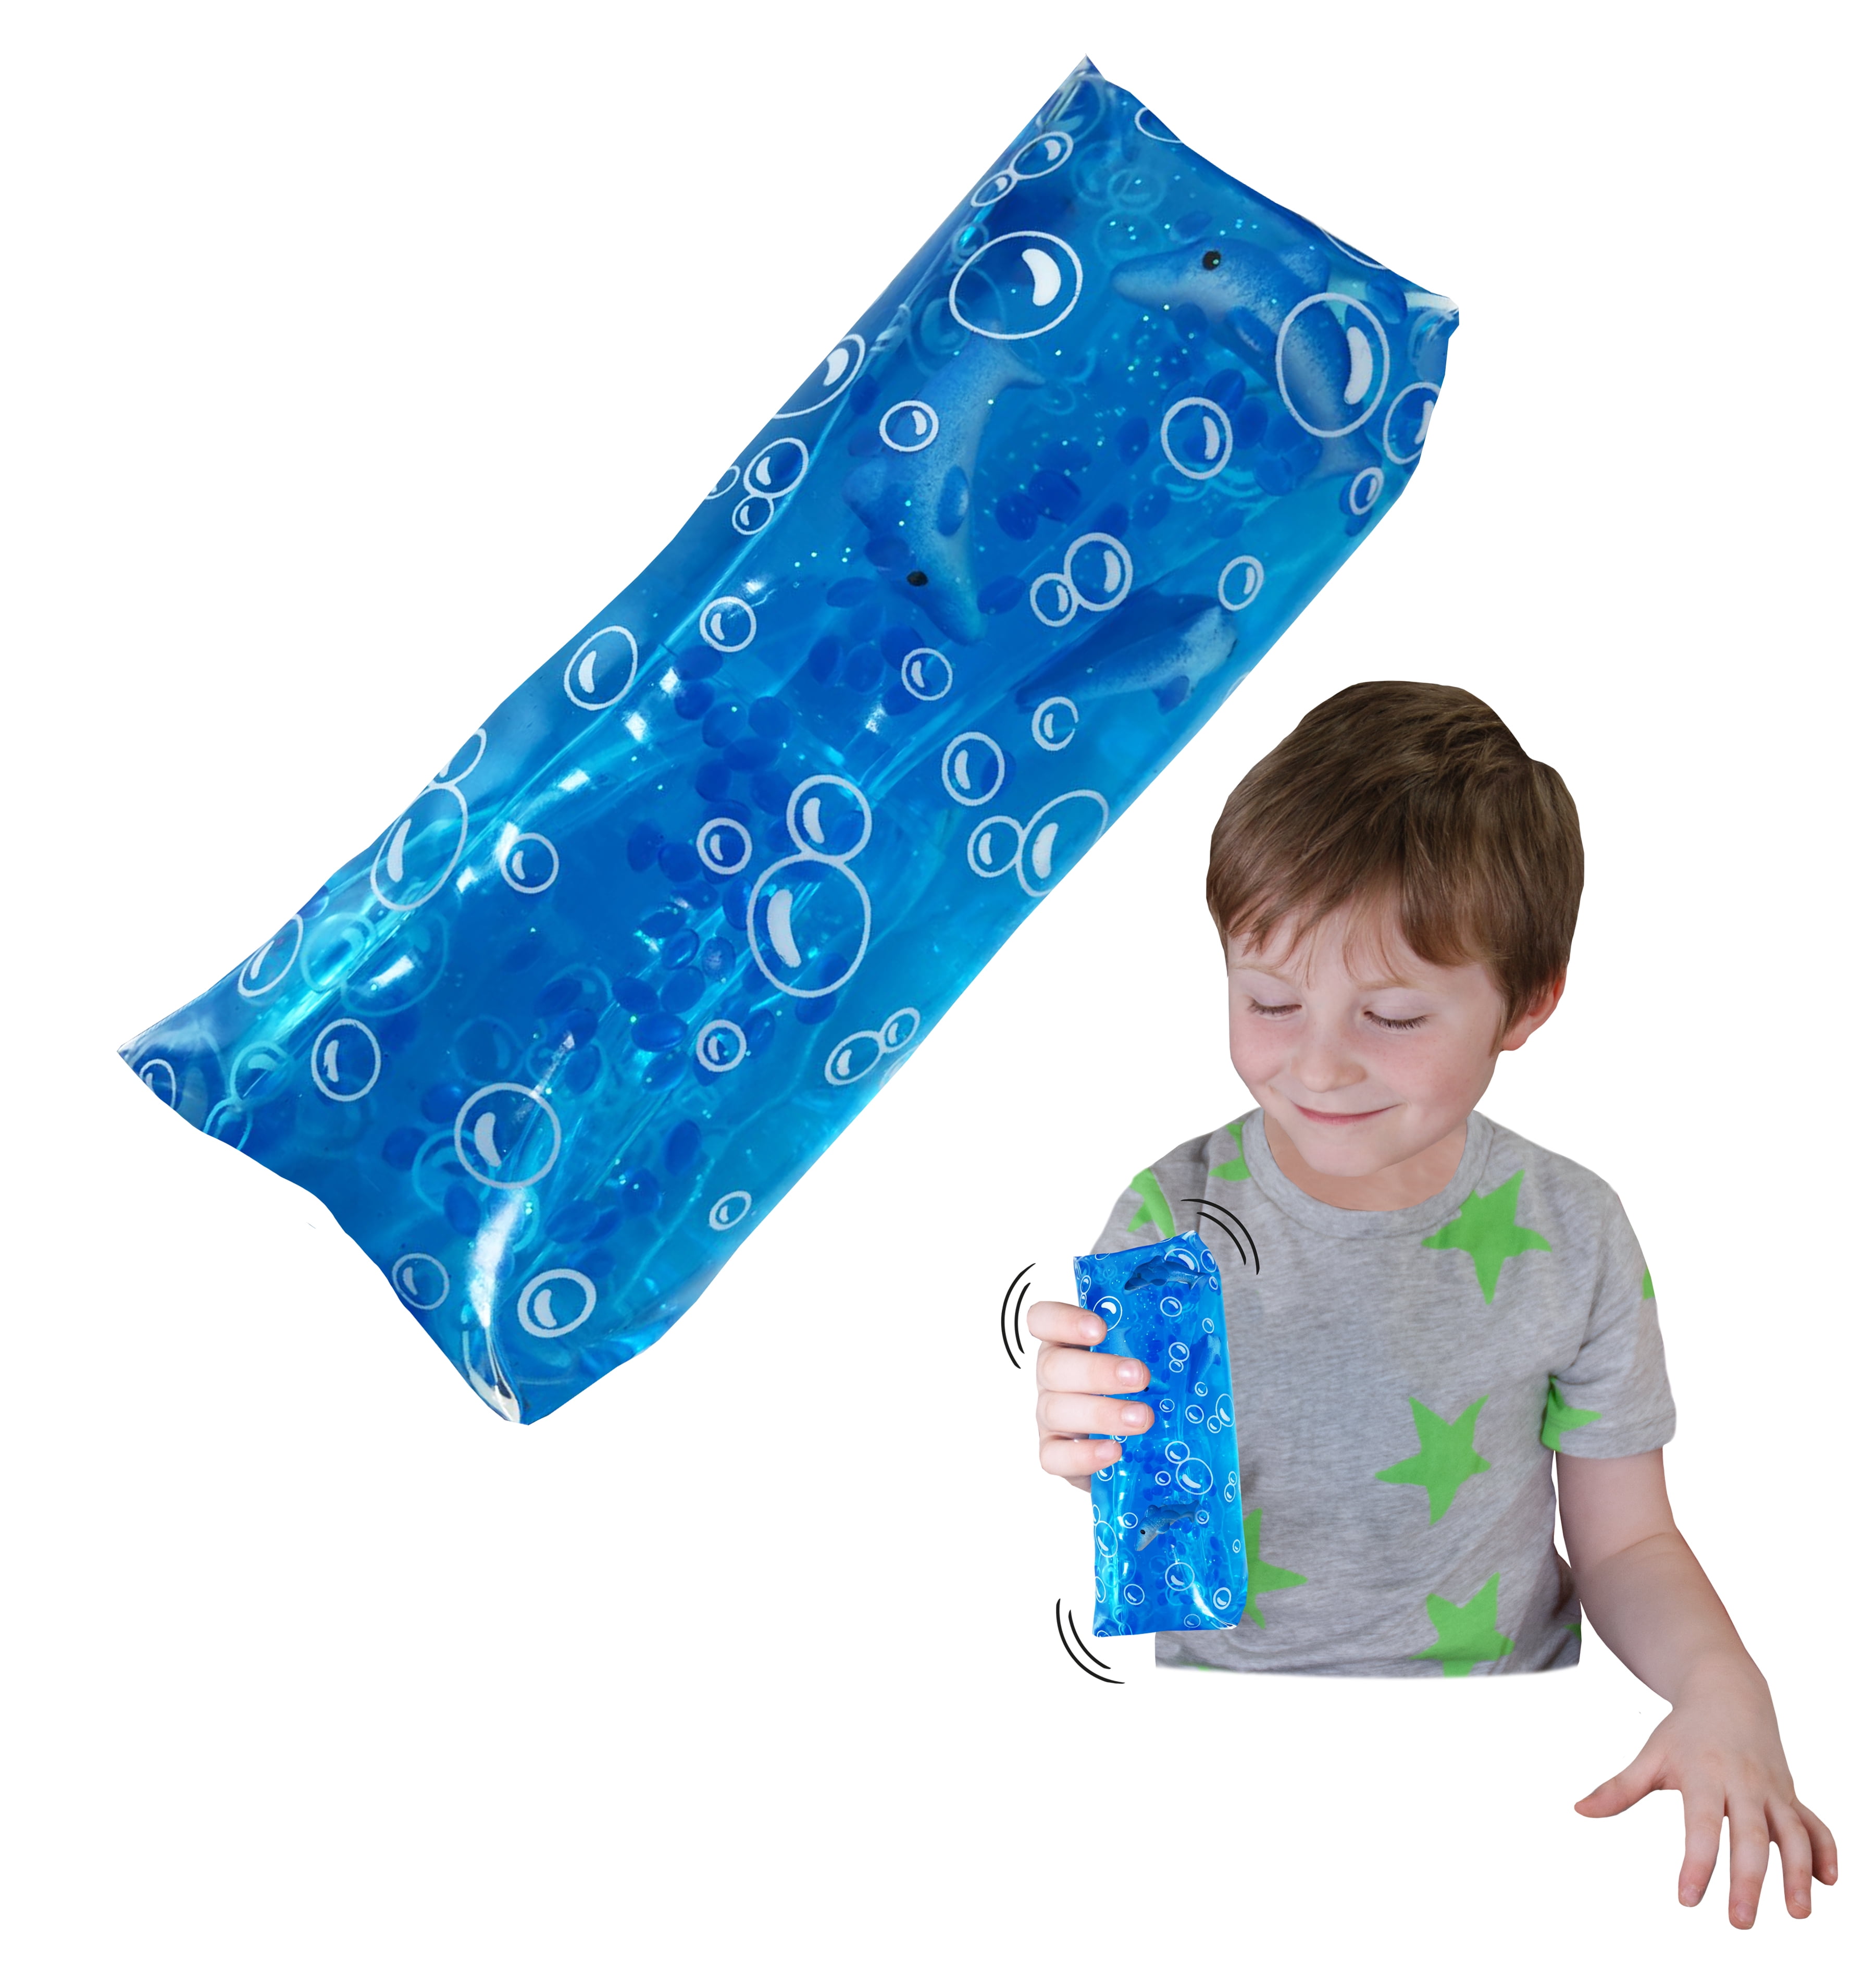 abort Daggry Bevidst Wiggly Jiggly - Sharks and Dolphins from Deluxebase. Large super squishy  water snake fidget toy with dolphin and shark figures. Great sensory toy  for autism and ADHD - Walmart.com